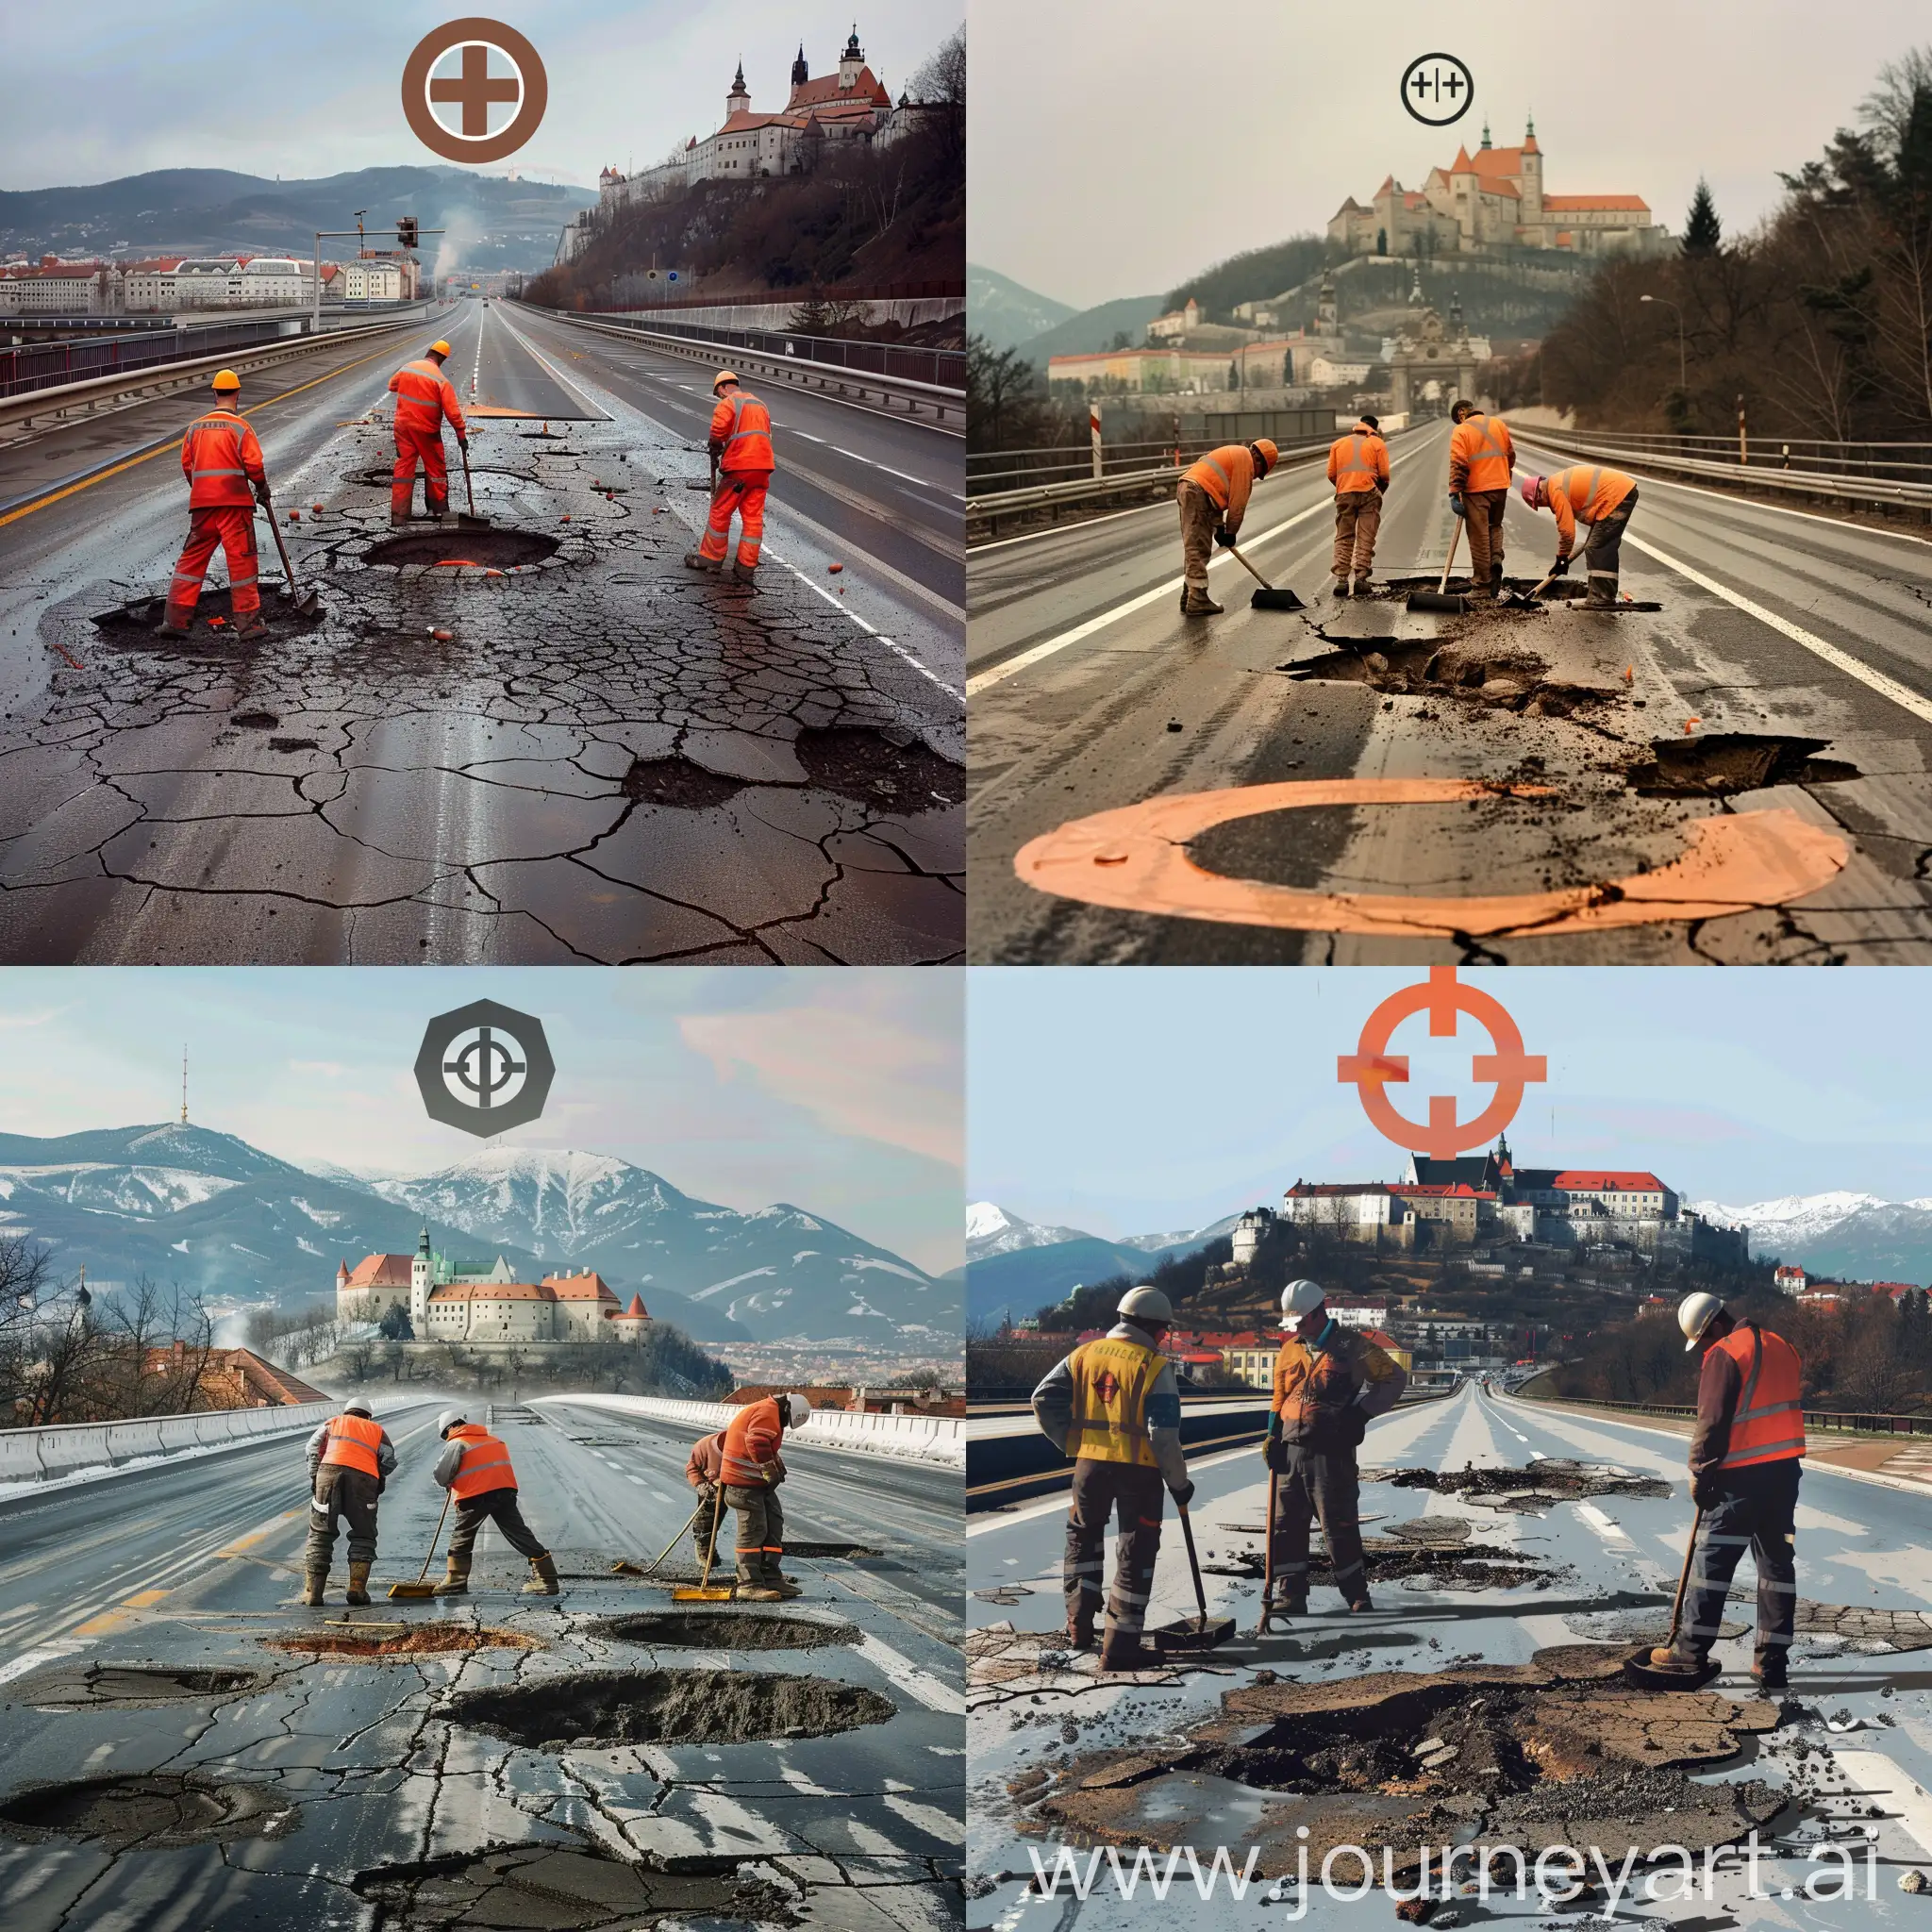 Highway, with some potholes on the surface, four road workers repairing them. Bratislava castle and High Tatras in the background. Stylized euro symbol on top to emphesize that repairs cost money.